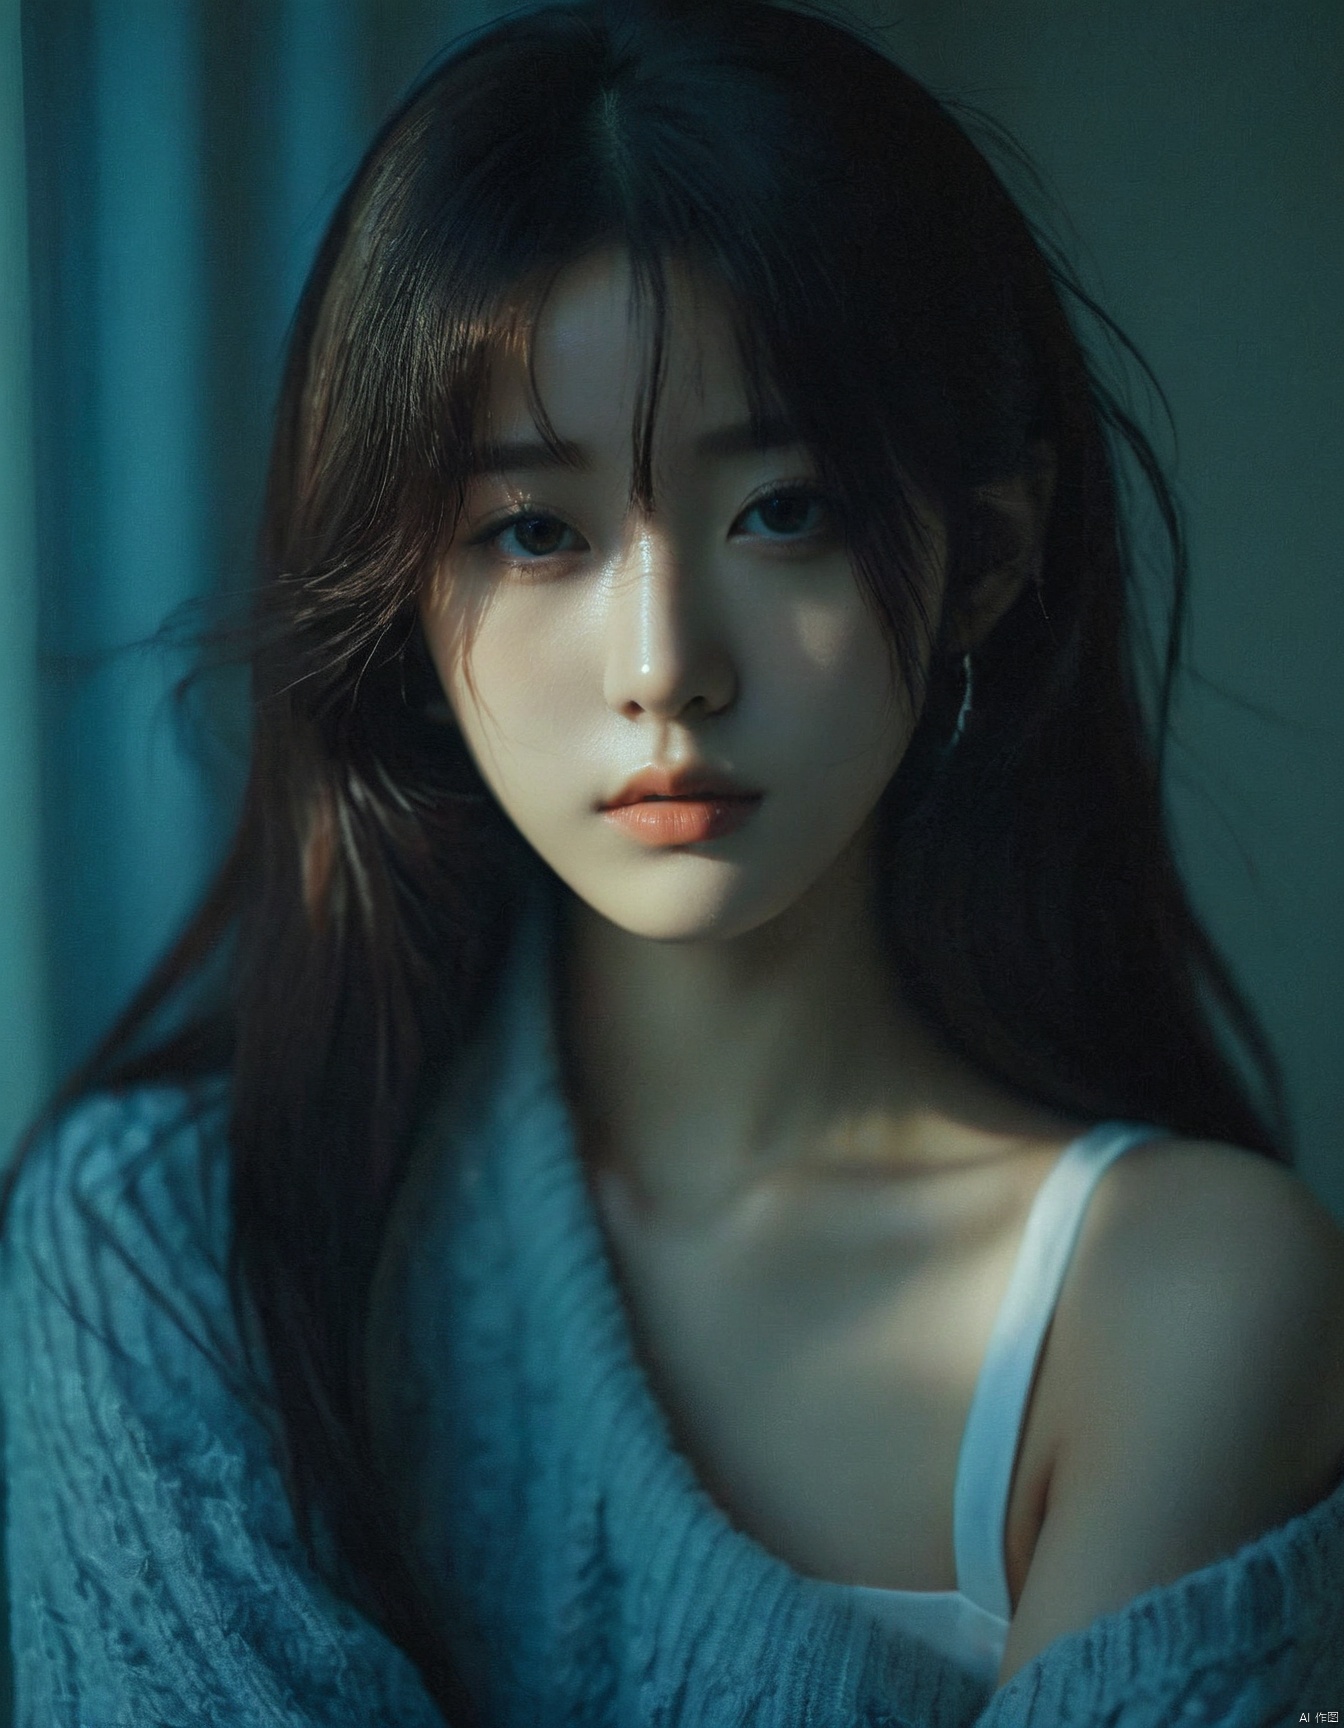  a young woman,looking at the camera,posing,ulzzang,naver fanpop,ffffound,streaming on twitch,character album cover,blues moment,style of Alessio Albi,daily wear,moody lighting,appropriate comparison of cold and warm,reality,
